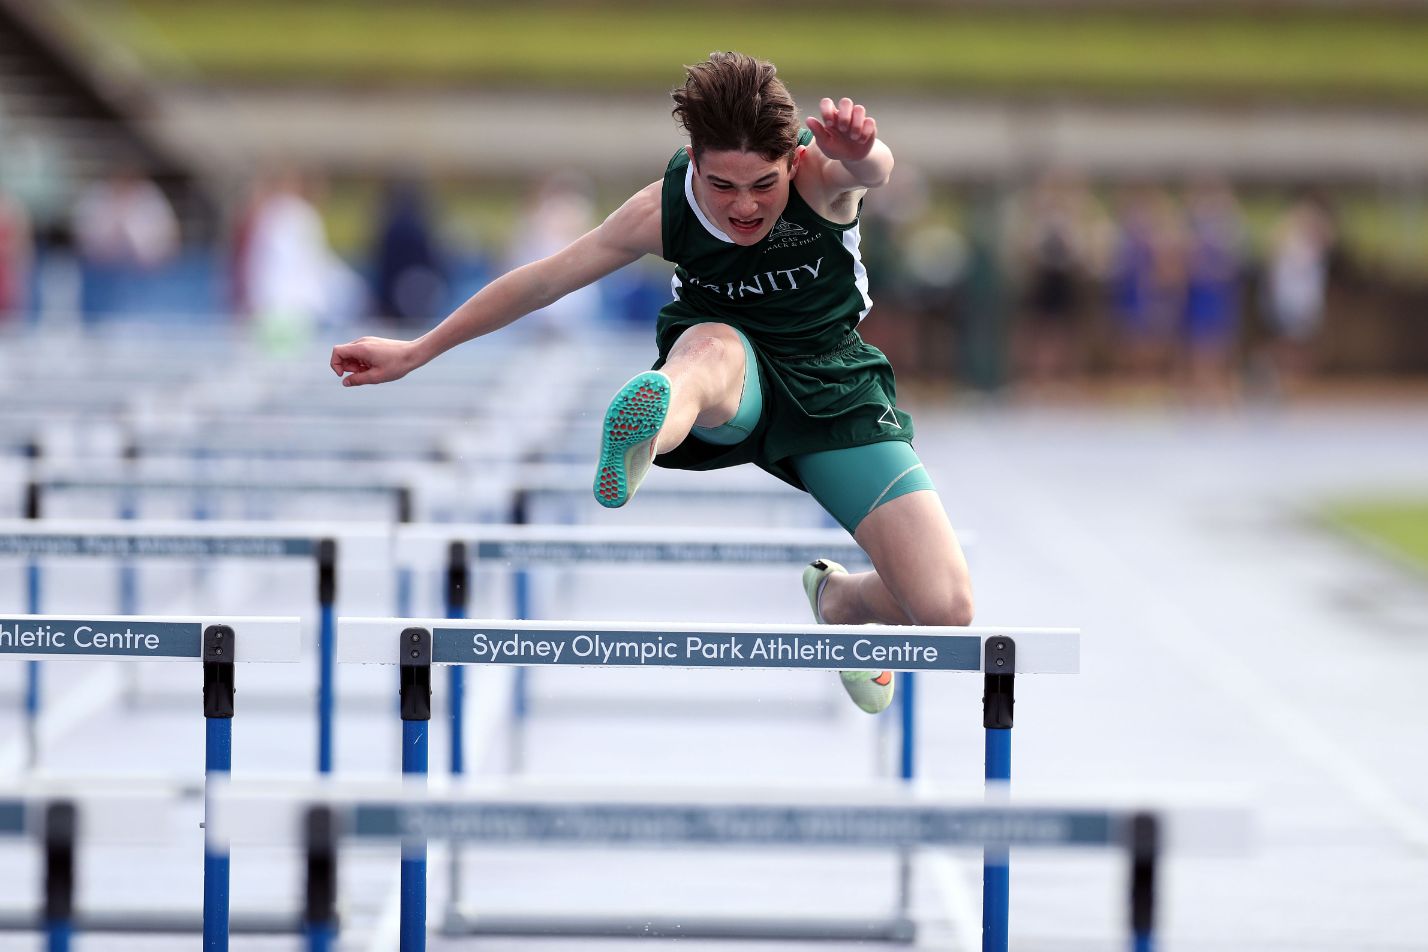 B Prideaux (9WH) in the 100m Hurdles